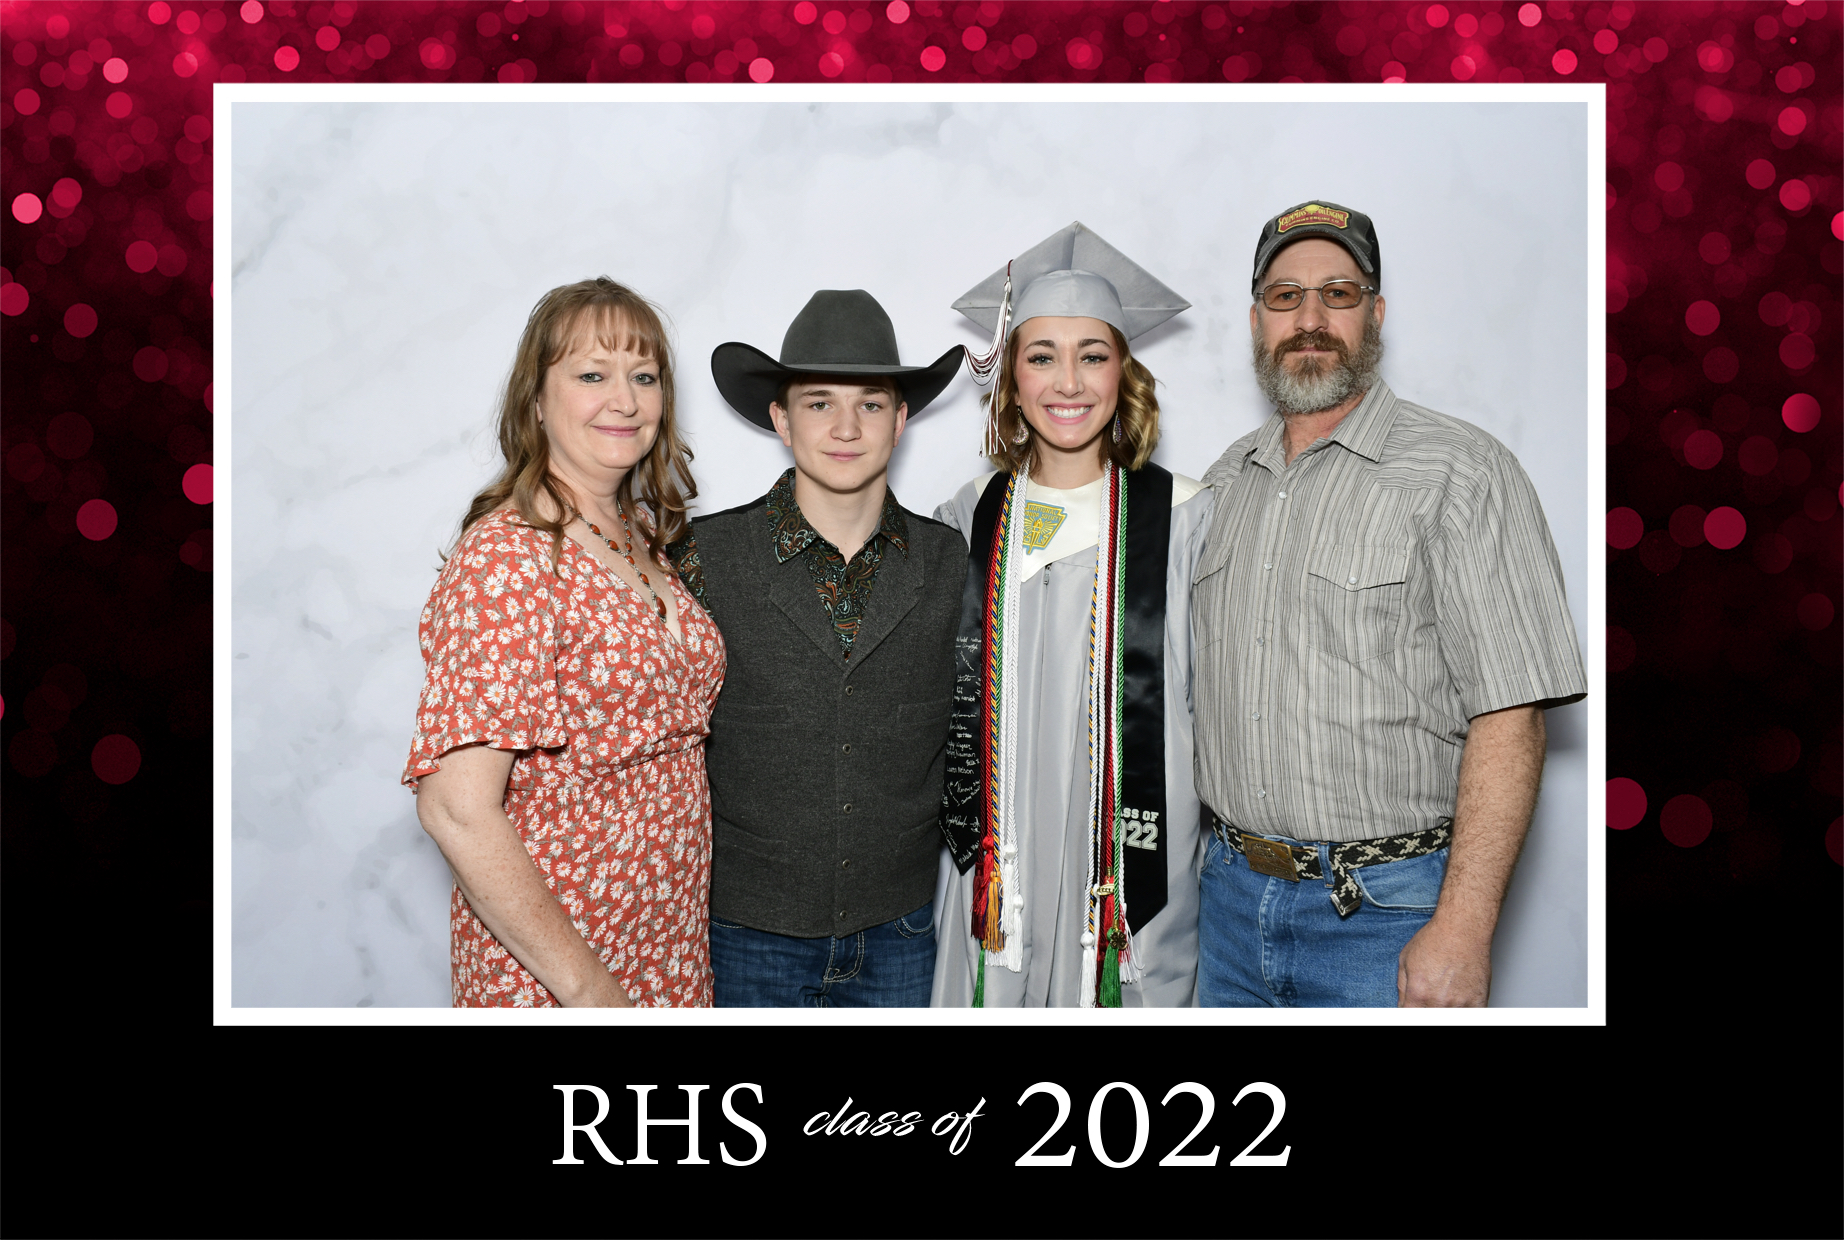 Sample family photo from a HS graduation